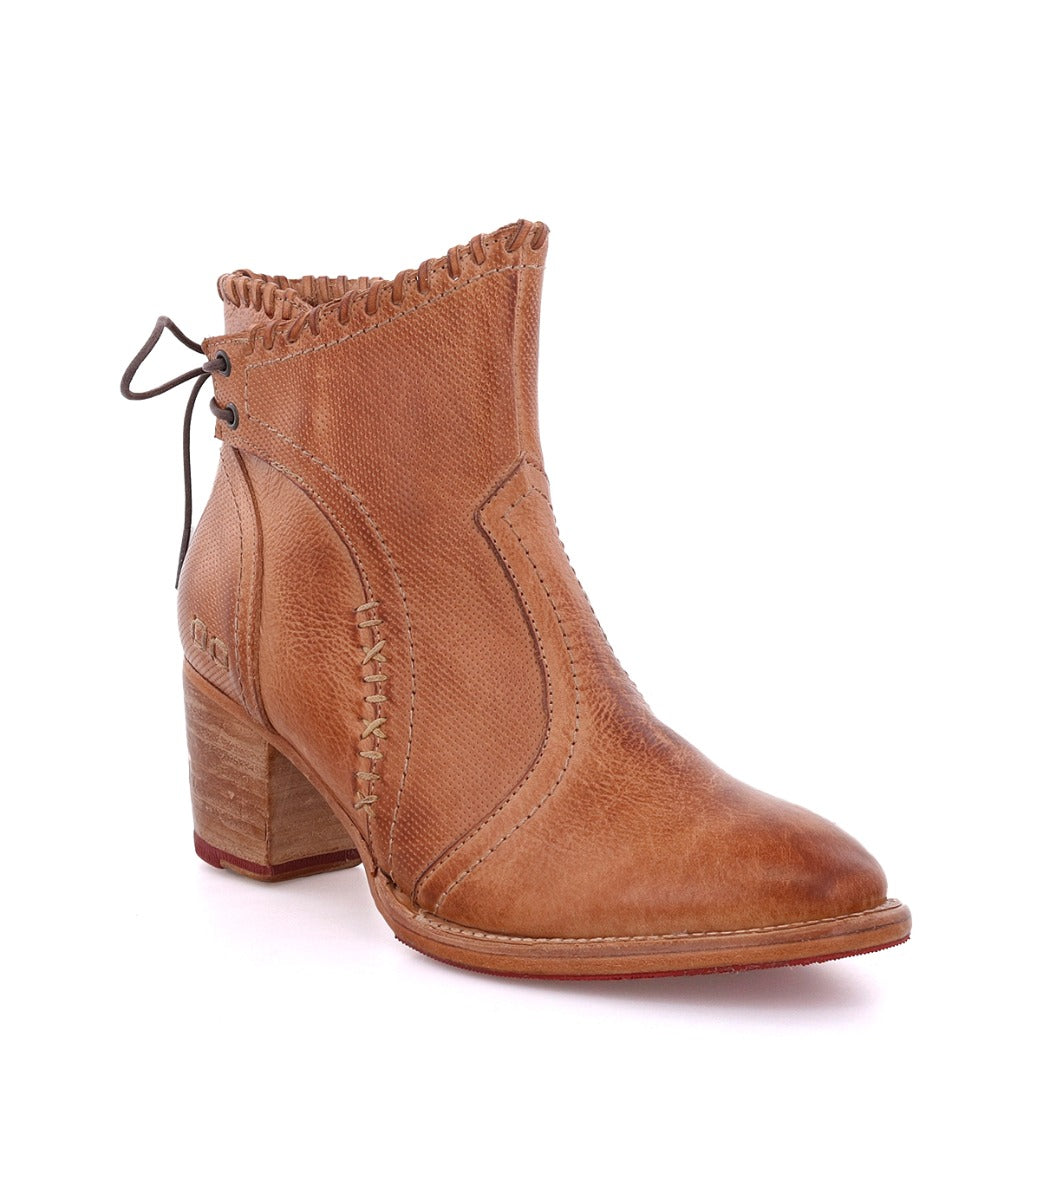 A women's tan ankle Bia boot with a wooden heel by Bed Stu.